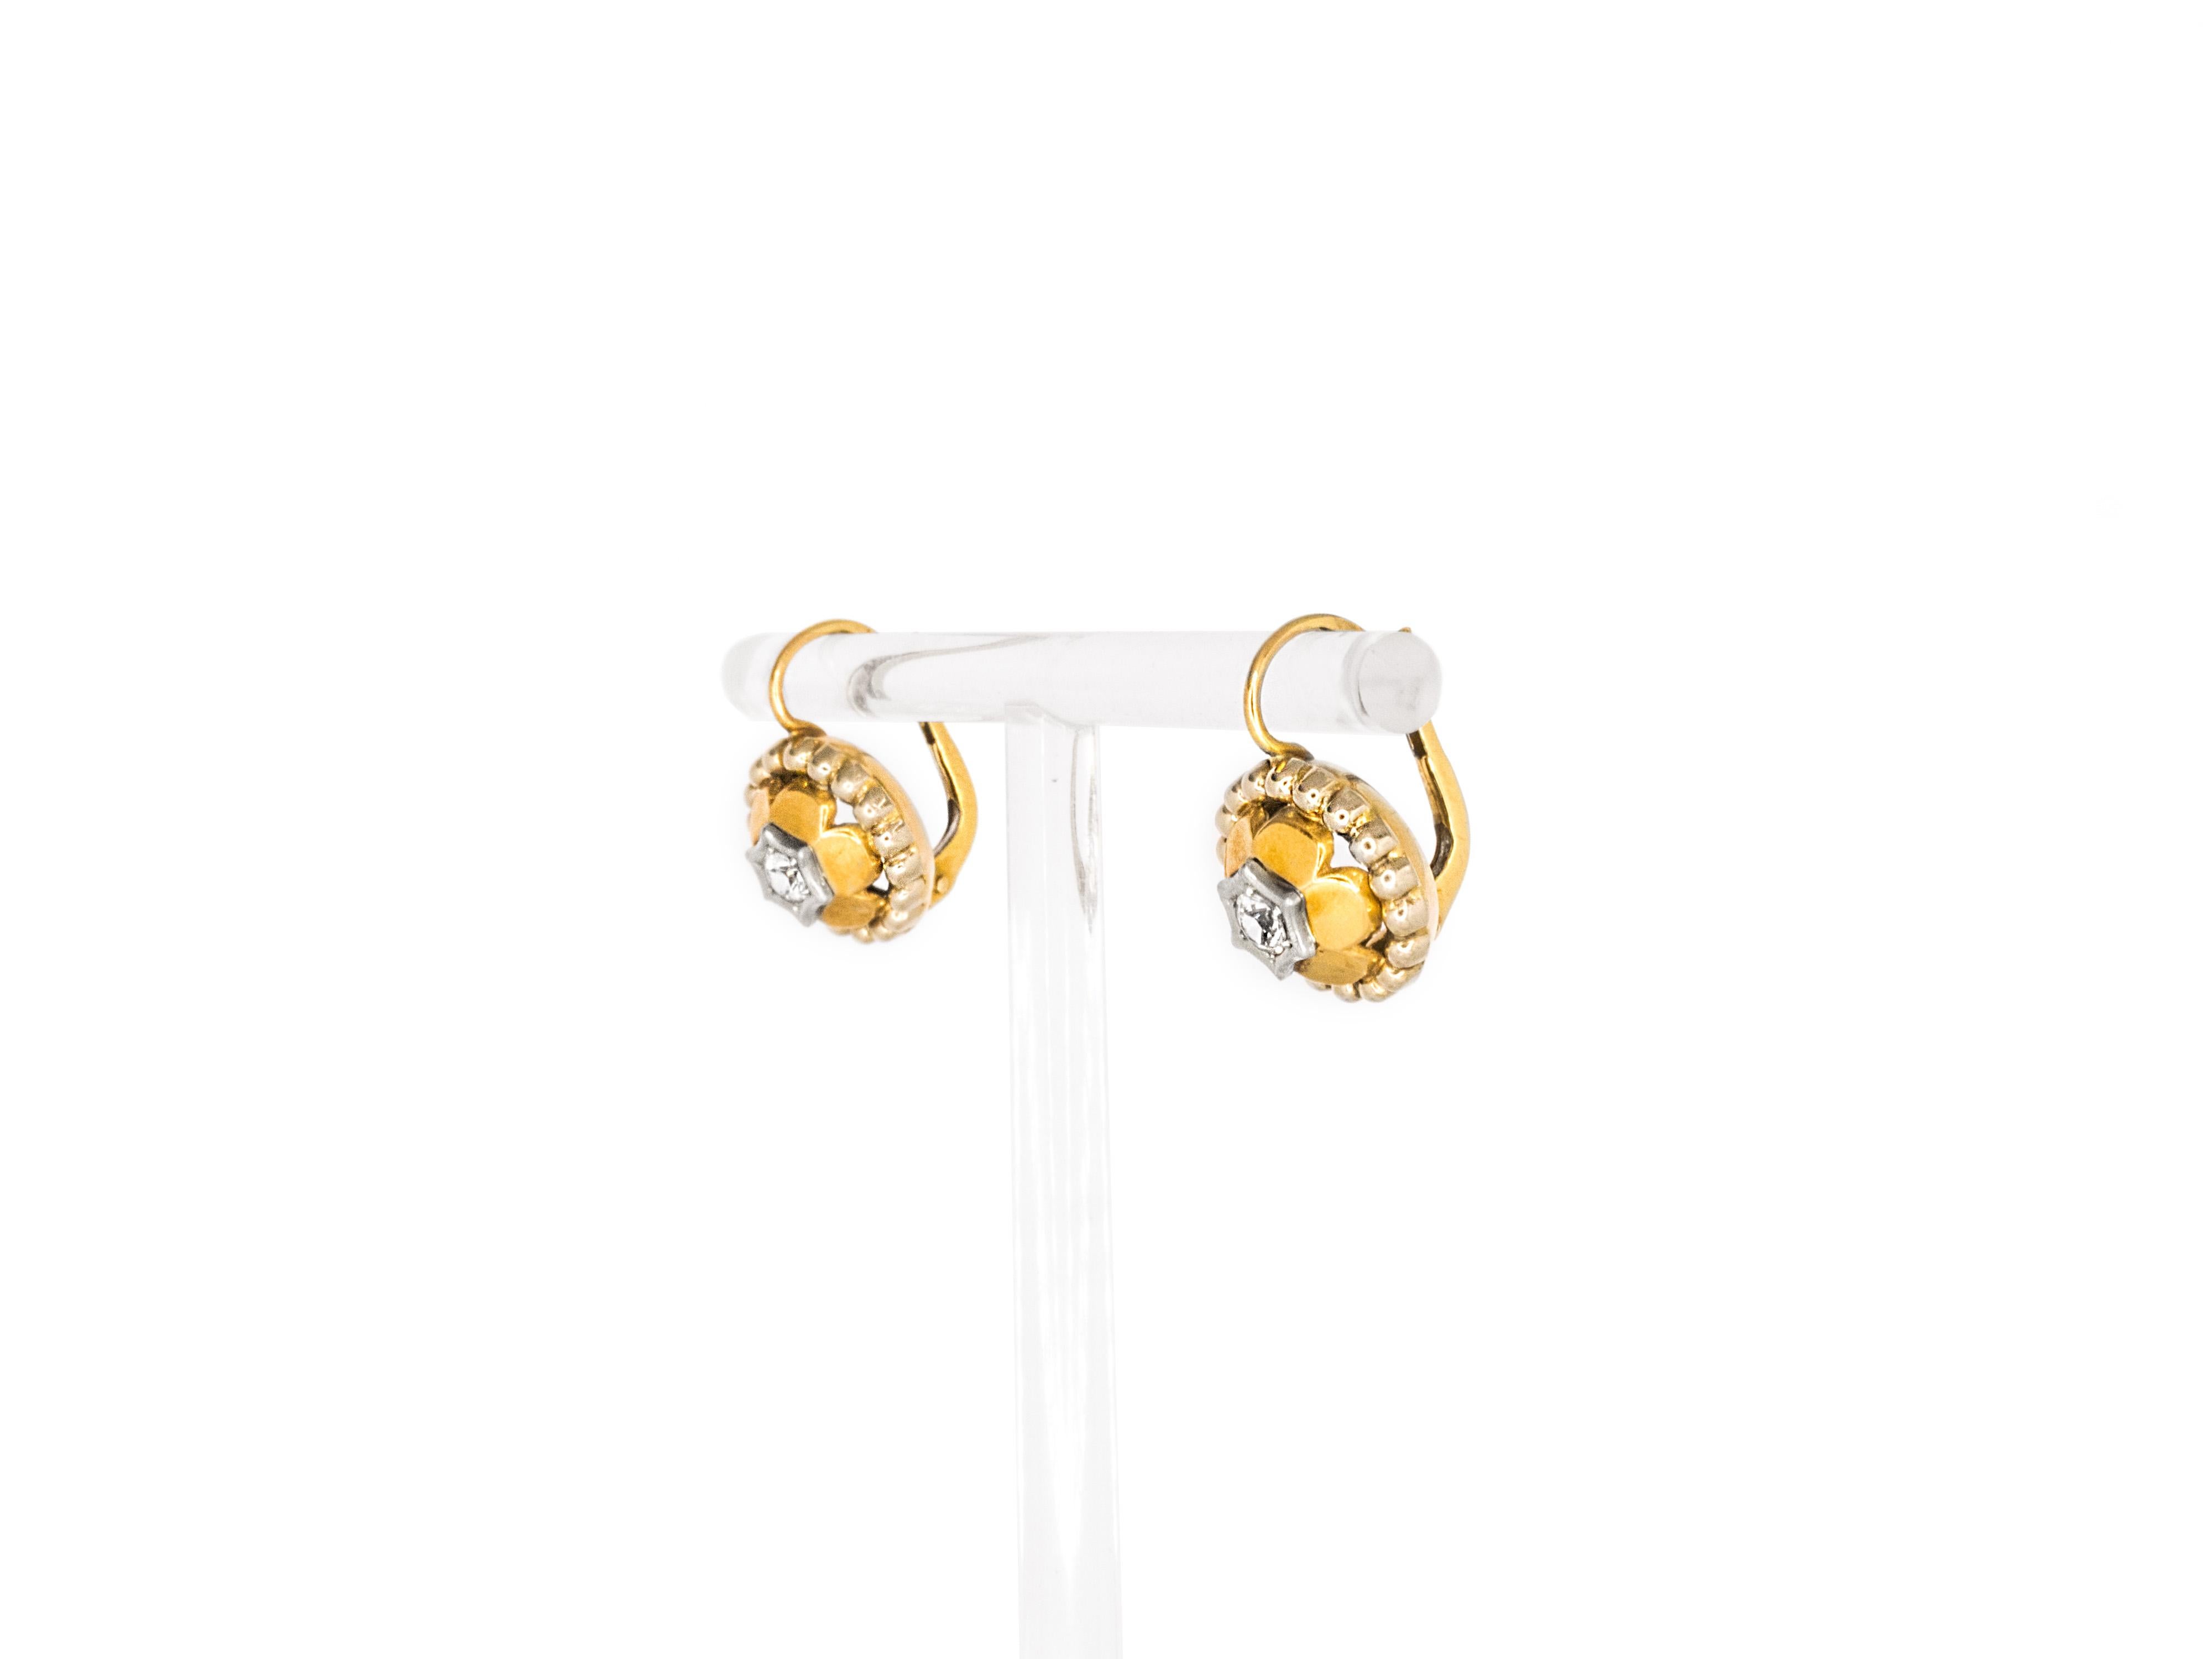 Brilliant Cut 18kt Yellow and White Gold, White Sapphires Victorian Dangle Earrings